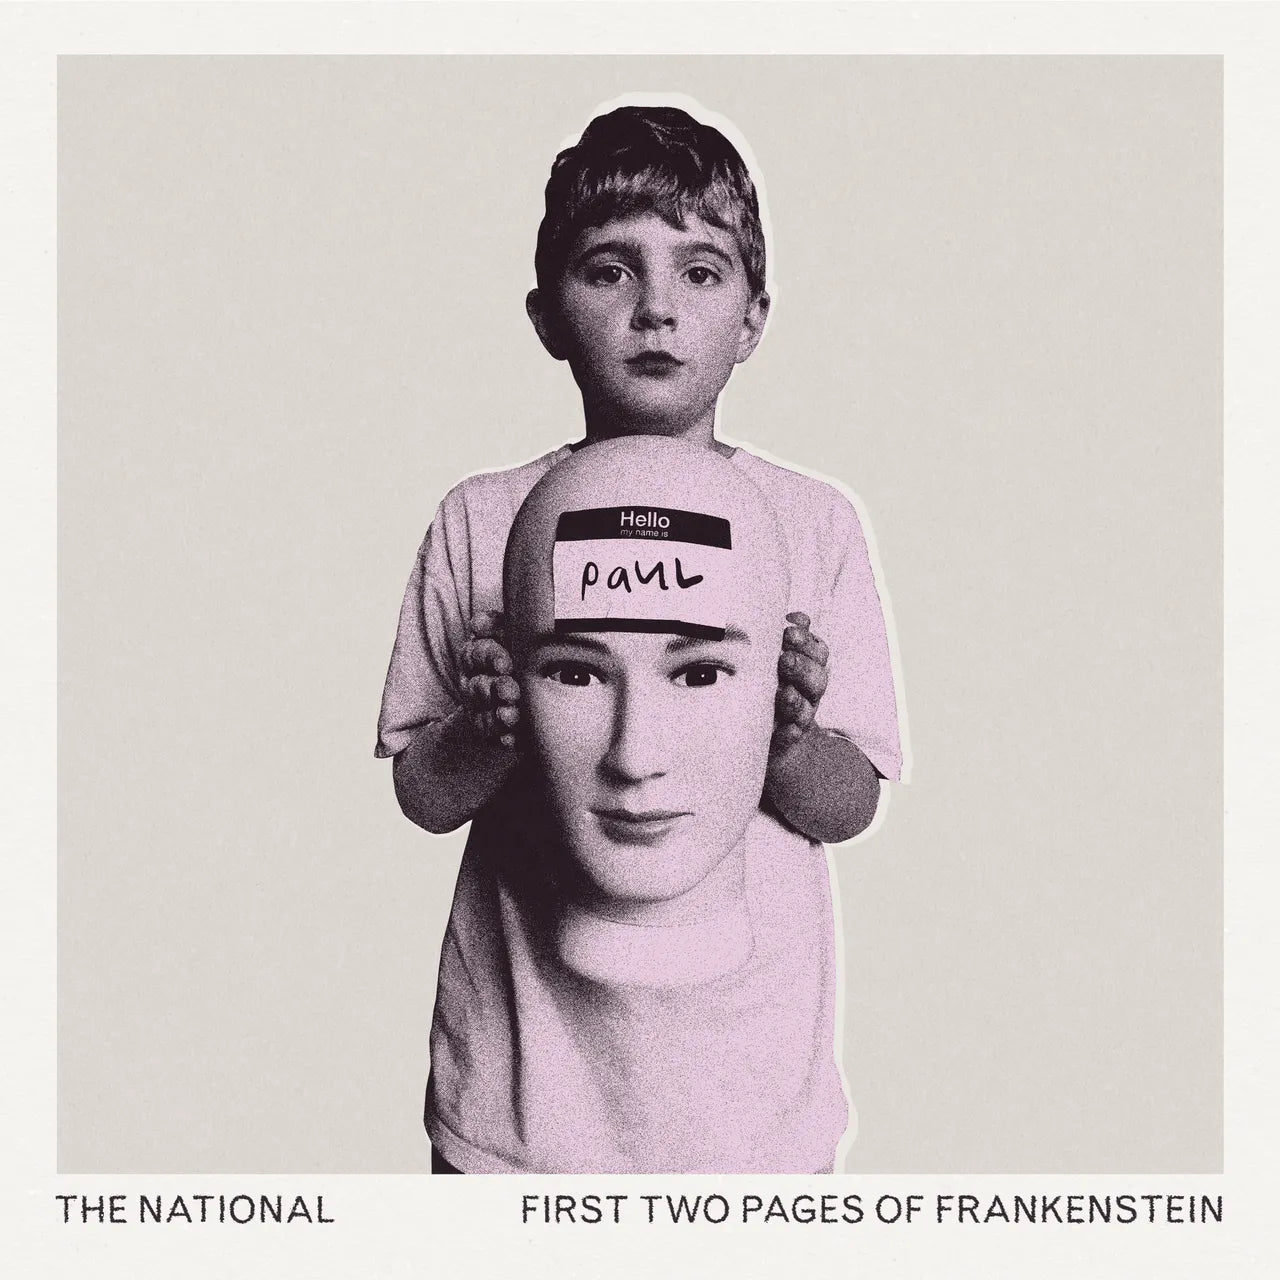 The National - First Two Pages of Frankenstein (Indie-Exclusive Limited Red Vinyl)